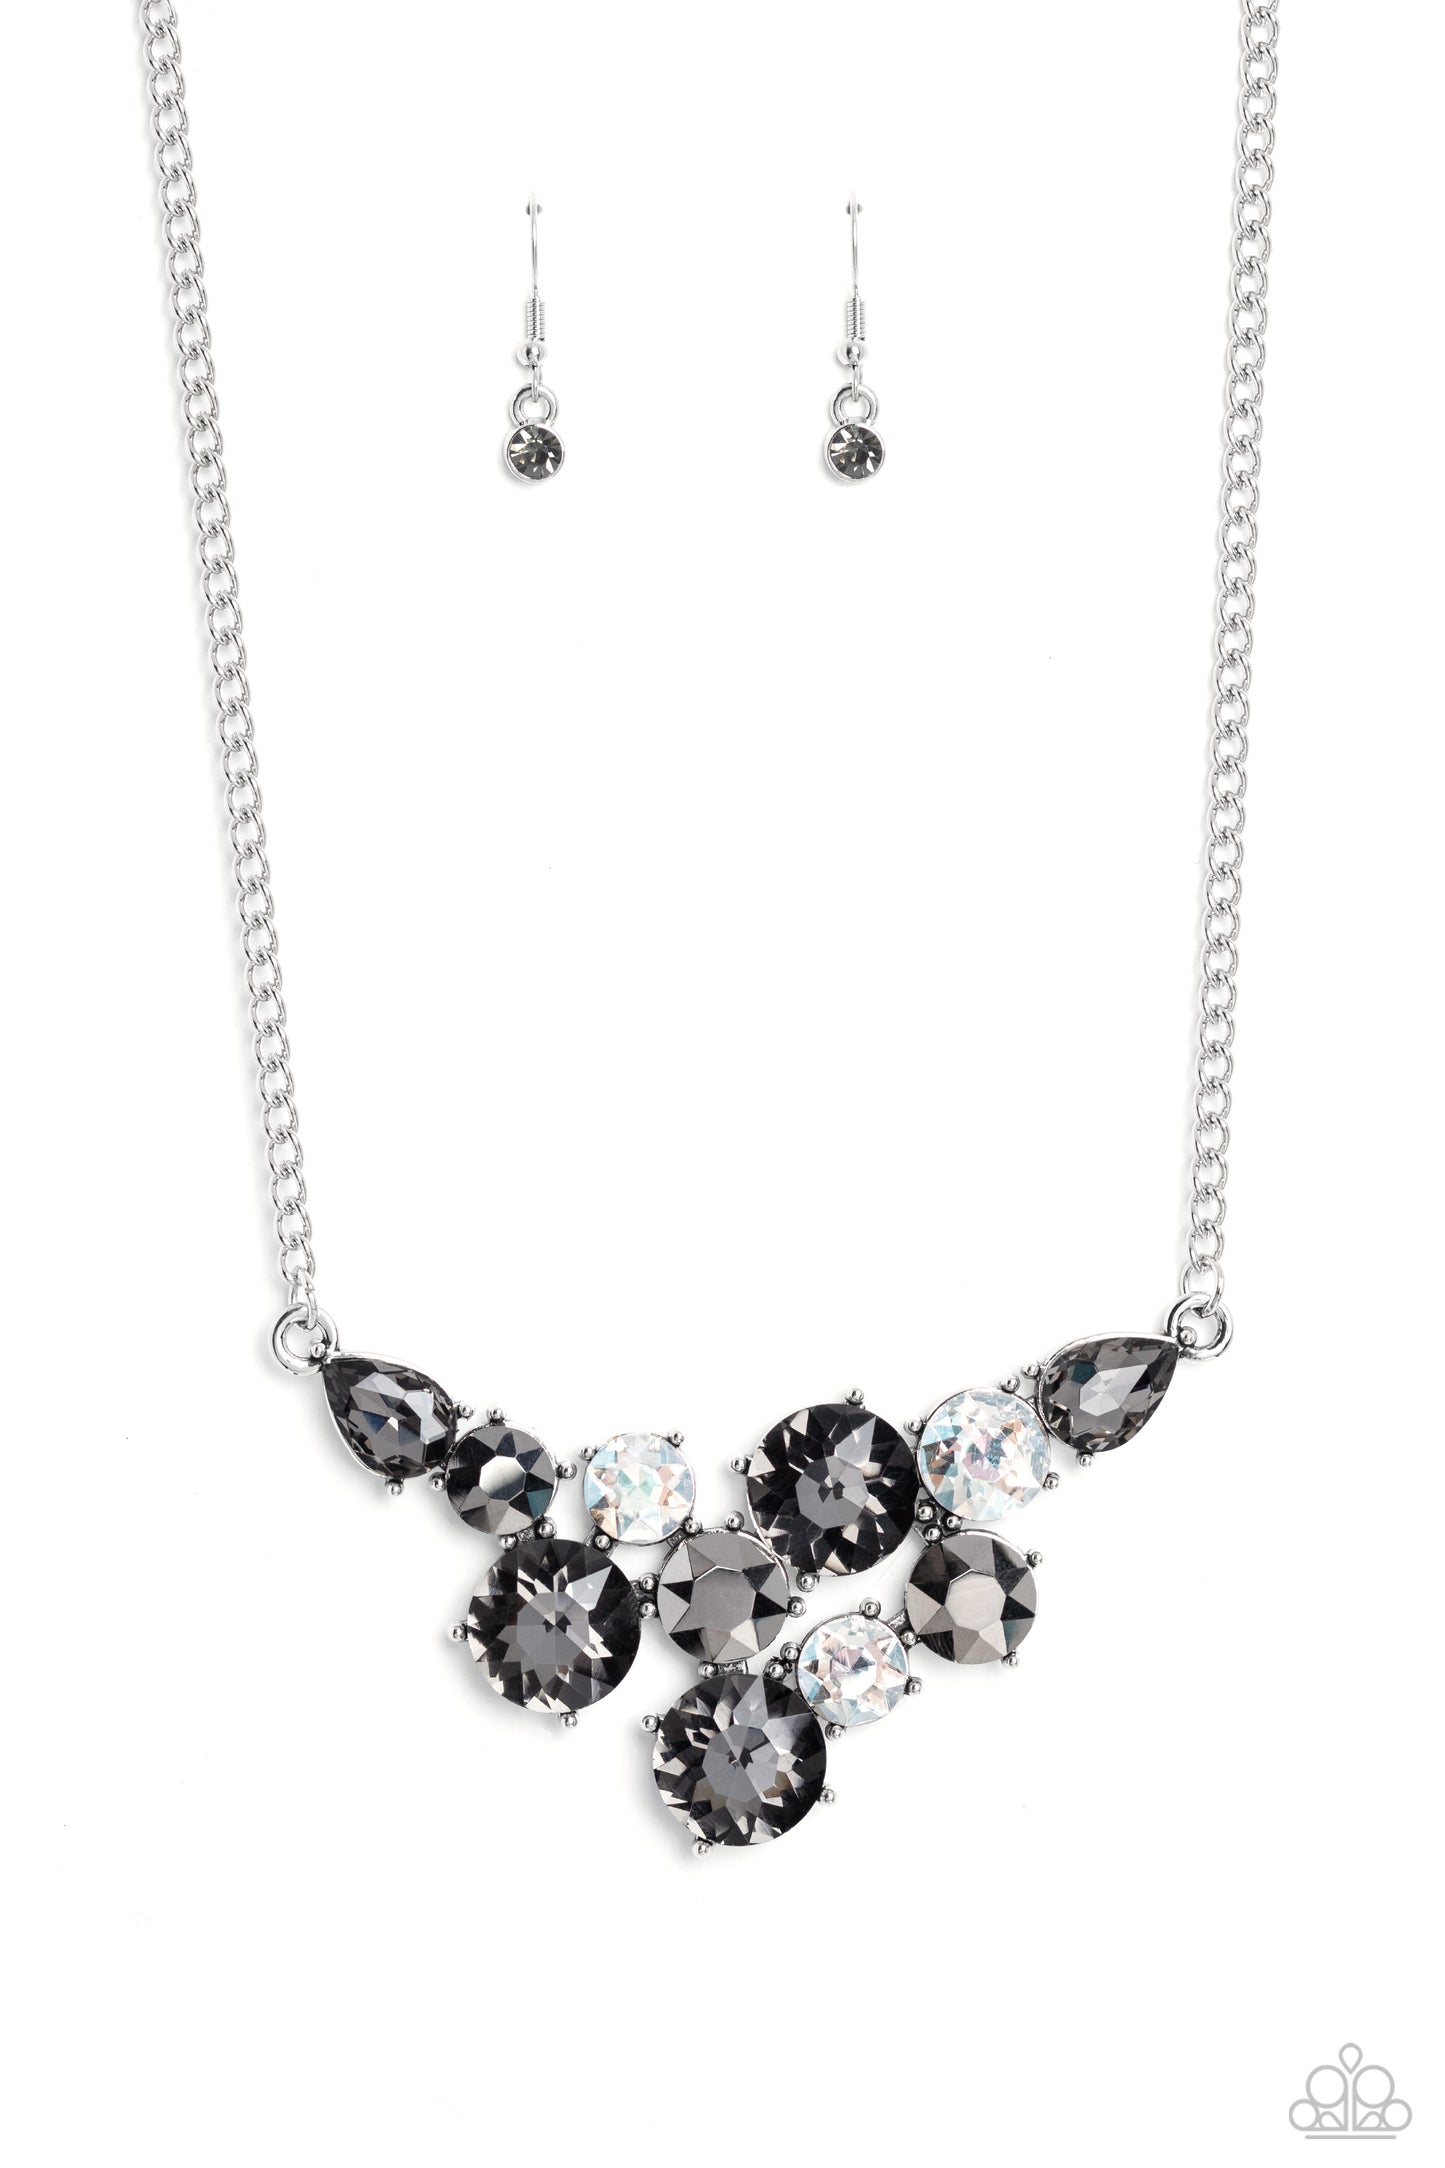 Round Royalty - silver - Paparazzi necklace